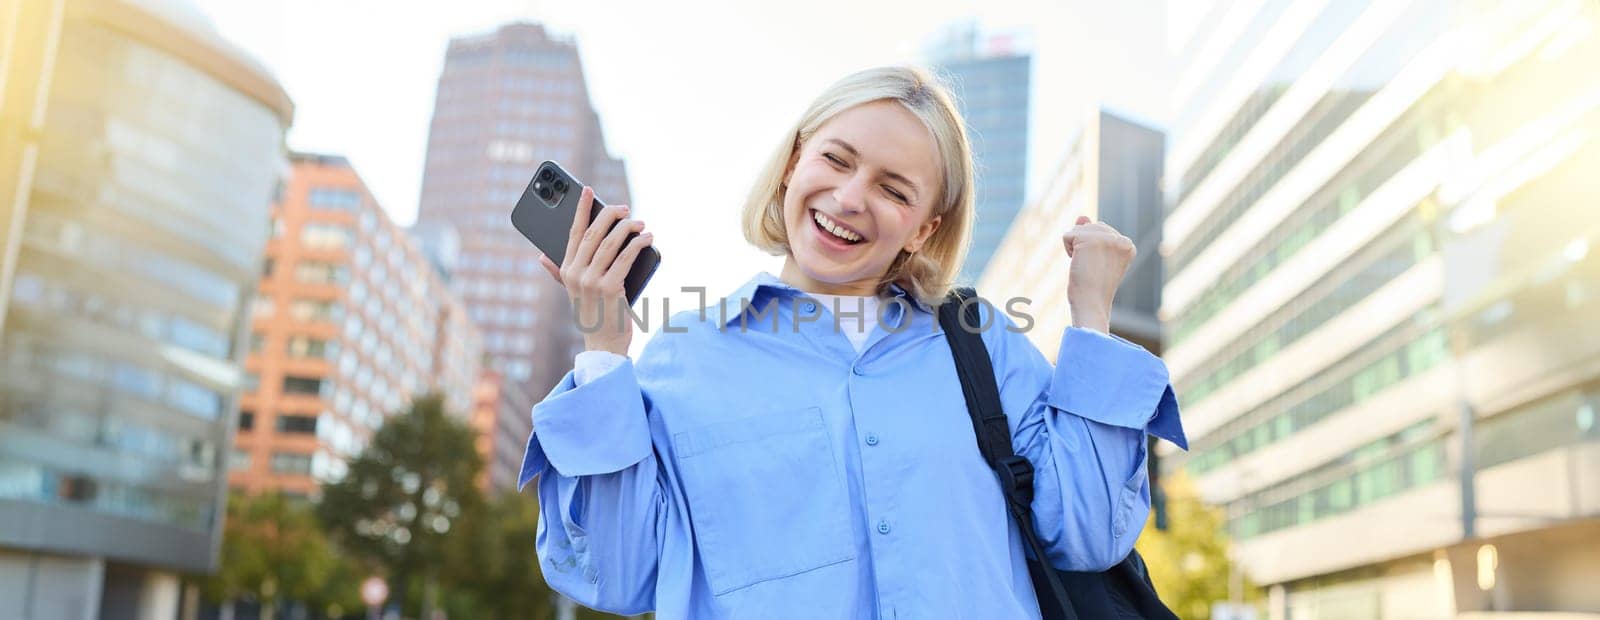 Portrait of happy, enthusiastic young woman, holding backpack and mobile phone, standing on street and rejoicing, triumphing, making fist pump gestures, dancing from happiness and joy.